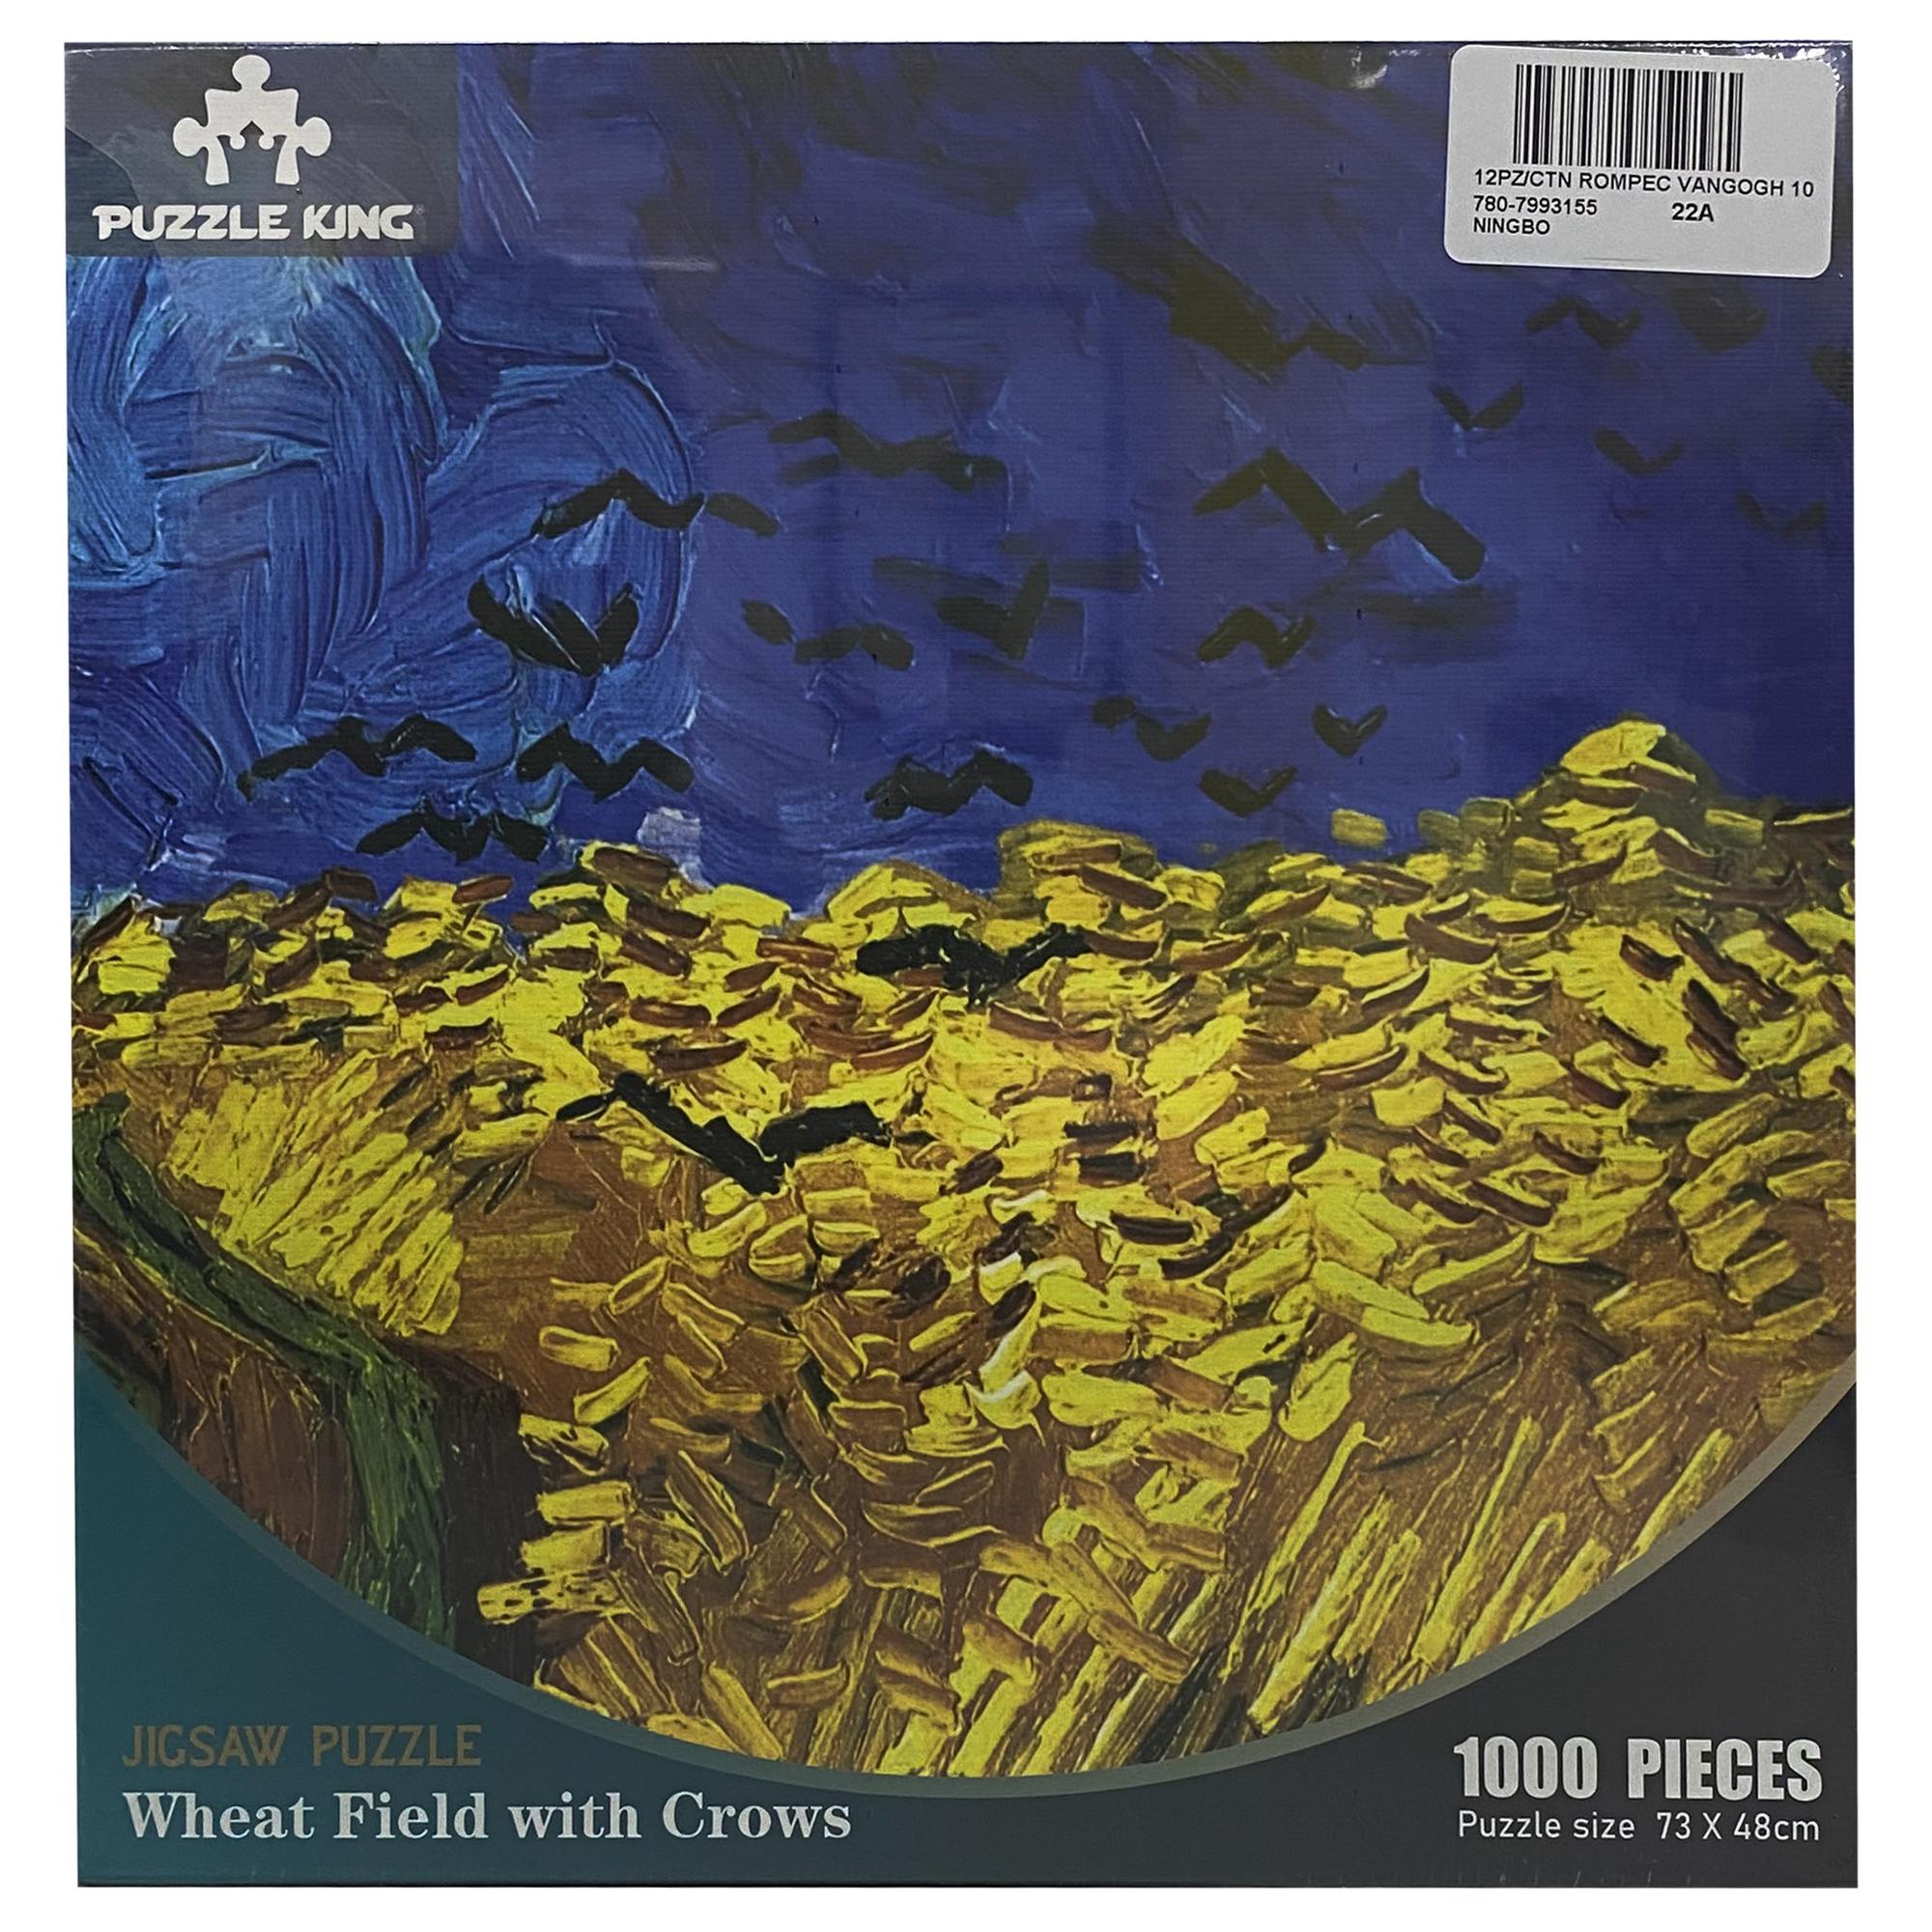 WHEAT PUZZLE WITH HORNS VAN GOGH 1000PZ - 780-7993155